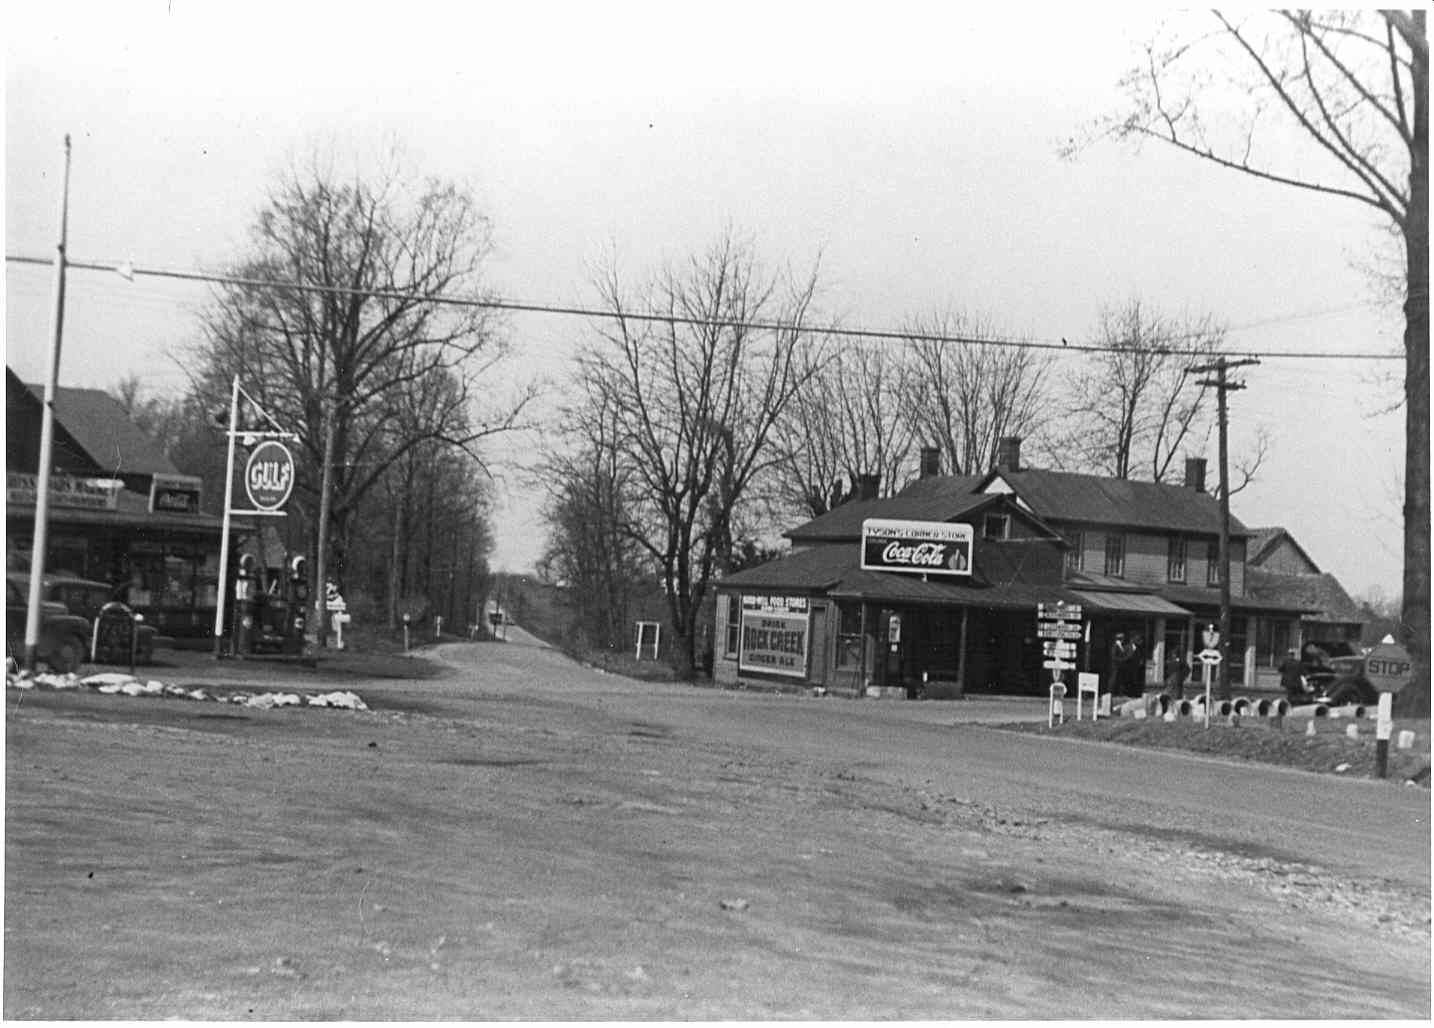 Annandale History: 1930's and 1950's